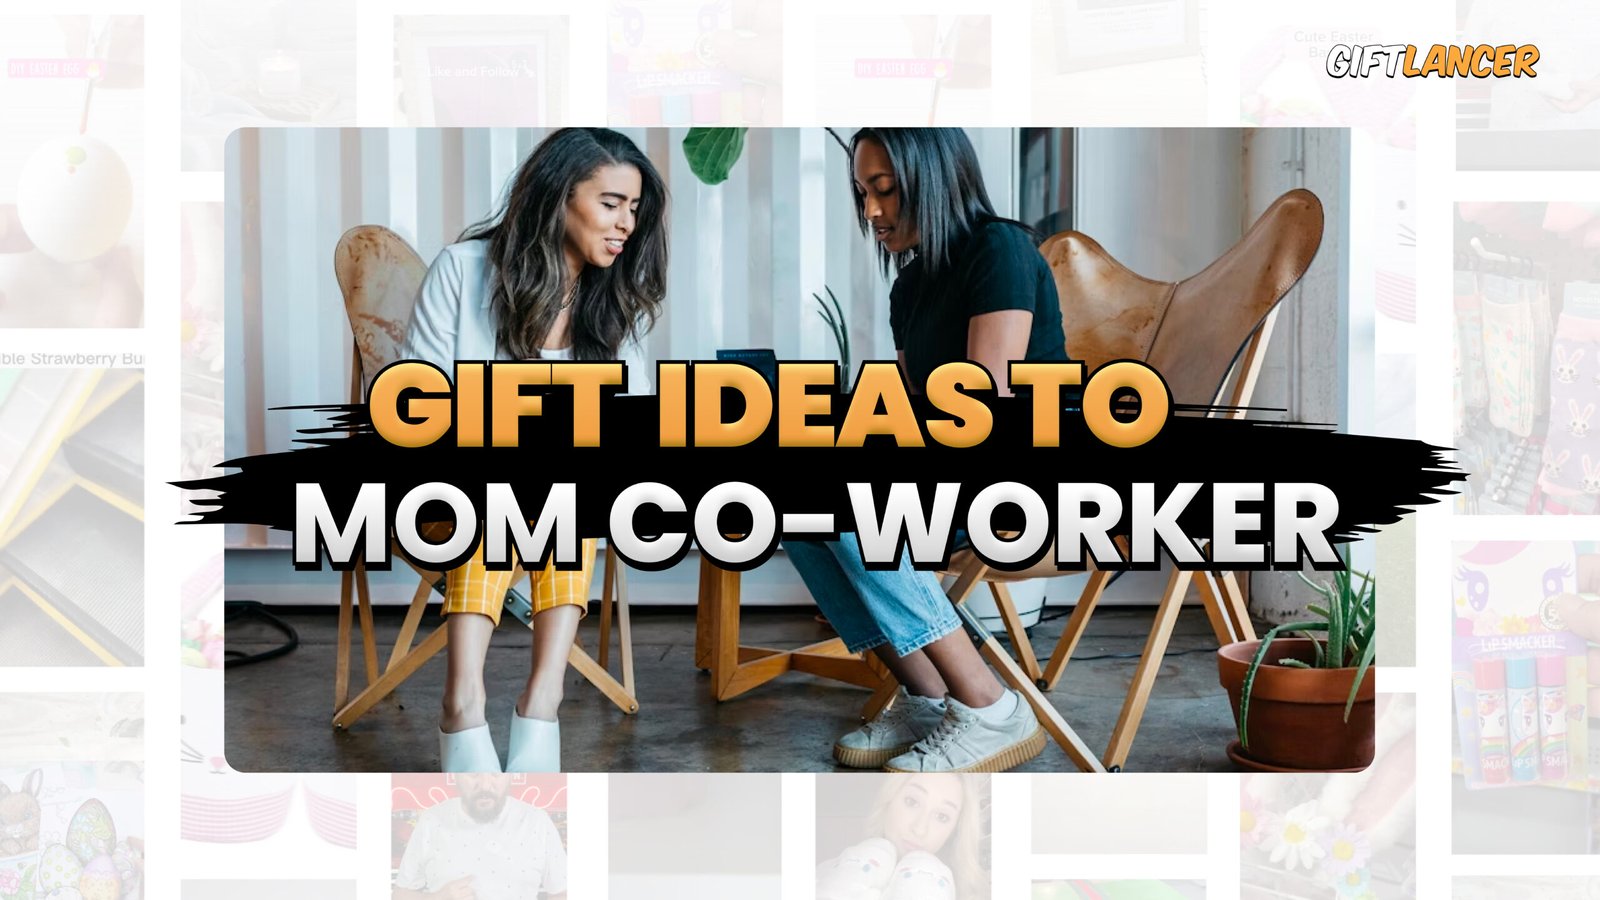 Top 5 Mother’s Day Gift Ideas for Coworkers Featured on Jimmel Kimmel’s Show